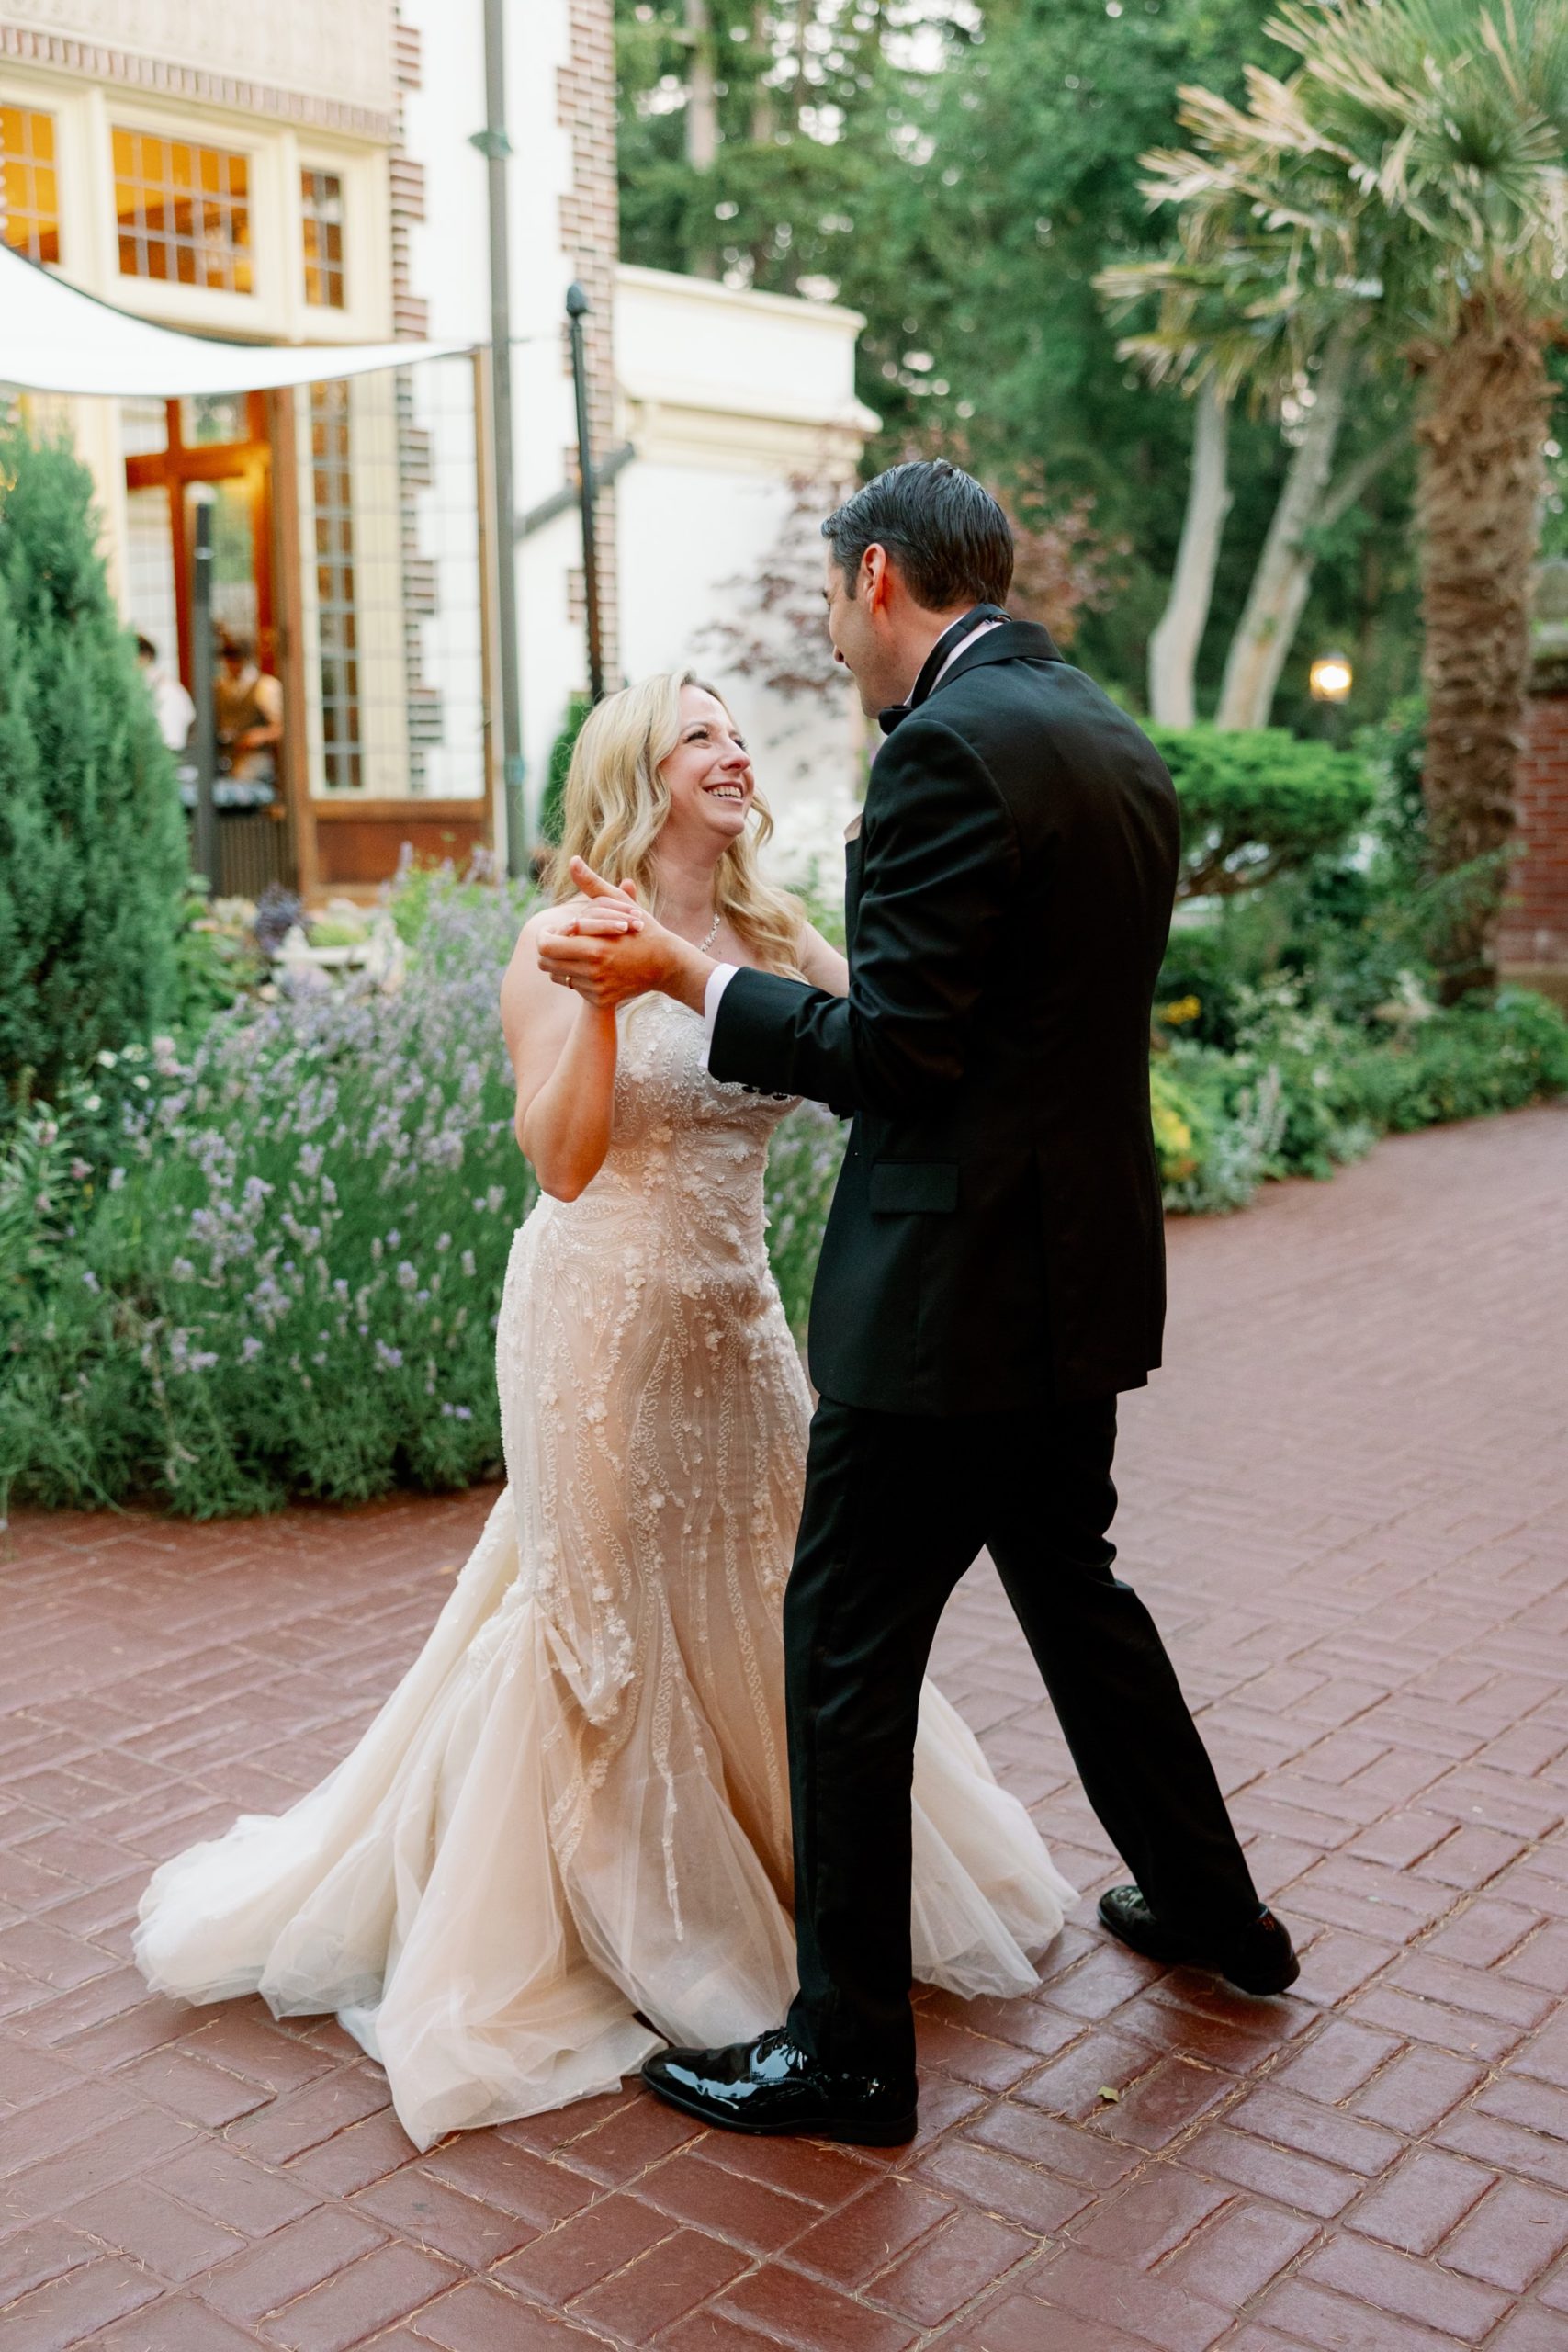 A wedding couple smiles at each other during their first dance outside at Lairmont Manor.